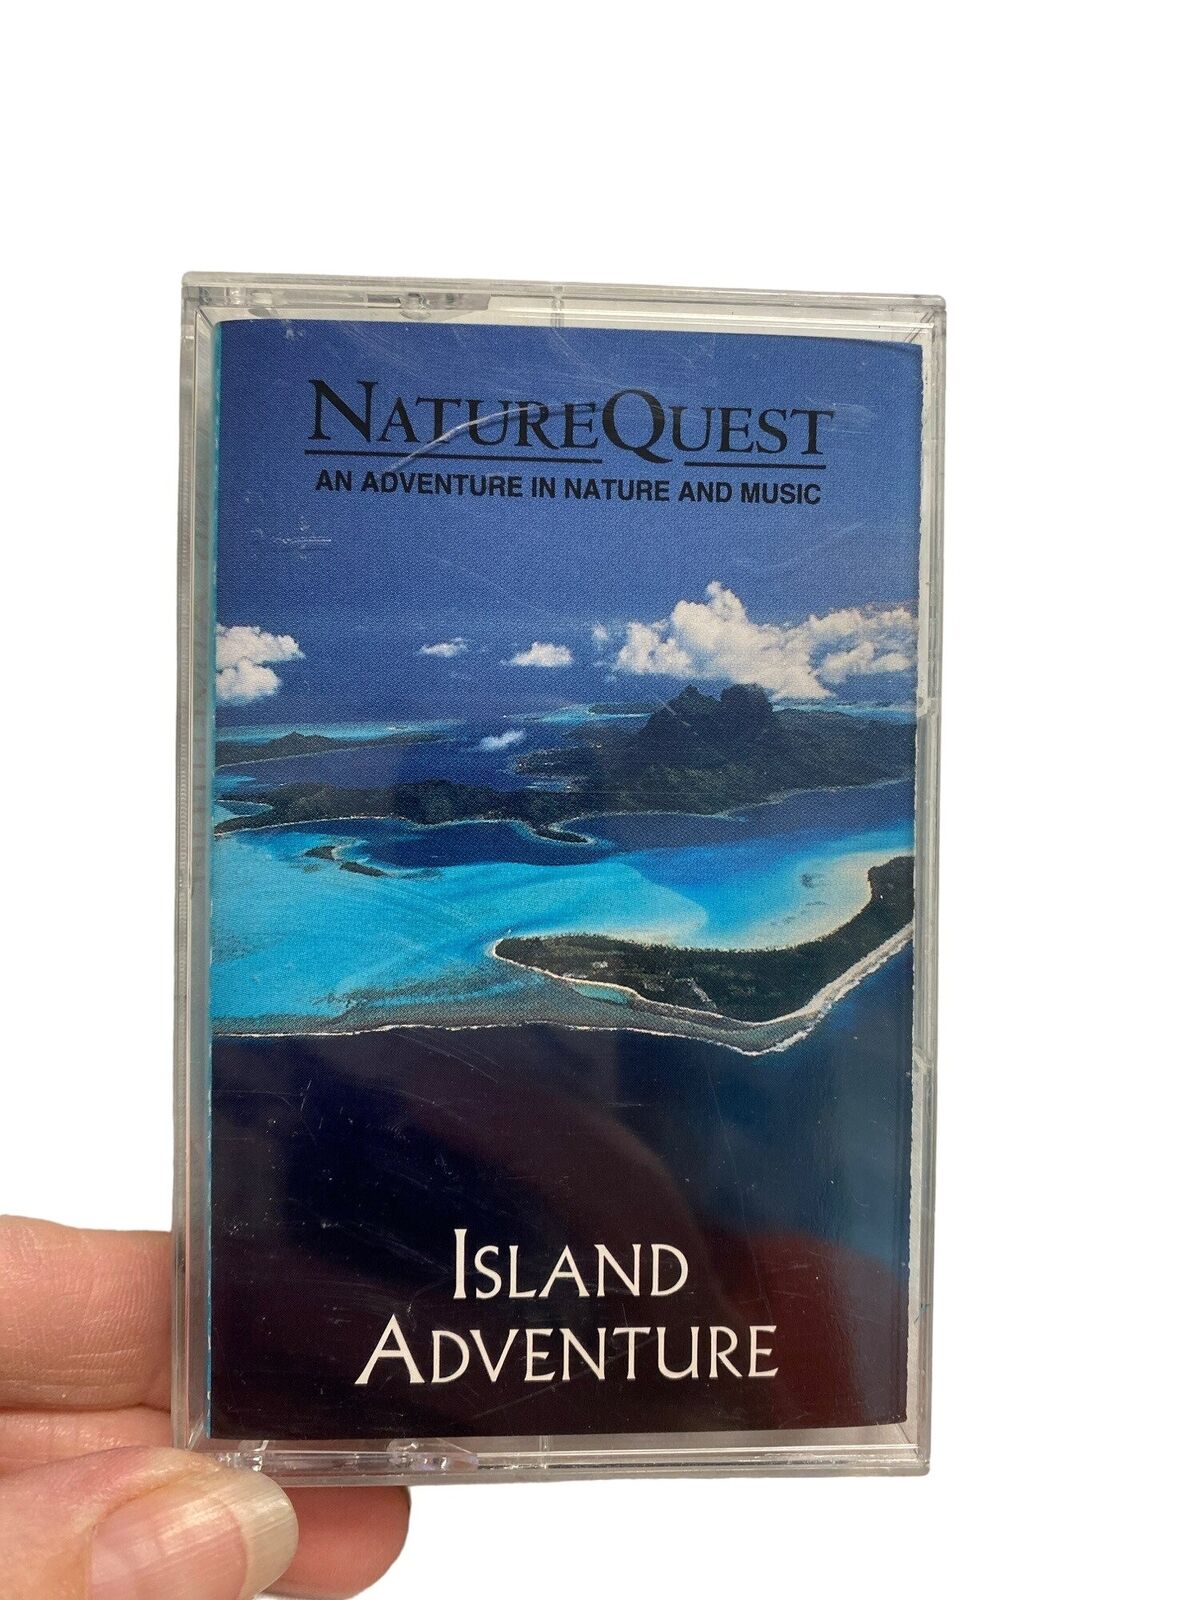 Vintage nature quest island adventure nature and music cassette tape